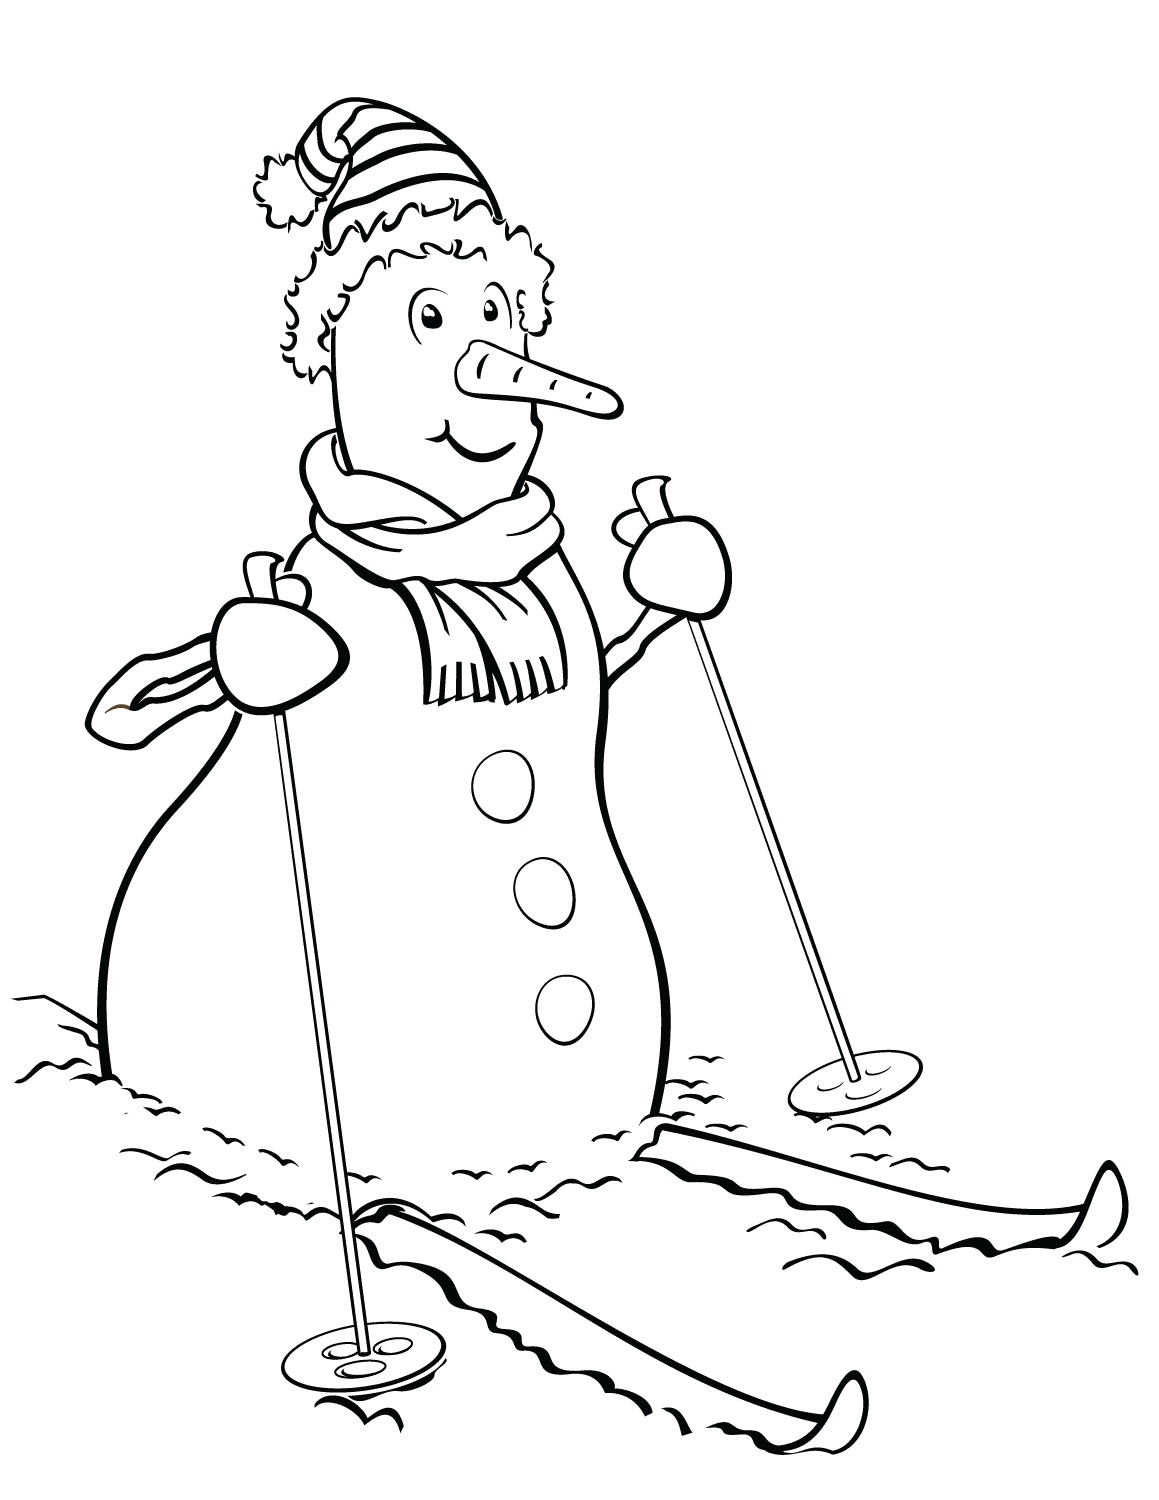 Snowman Loves Skiing Coloring Pages